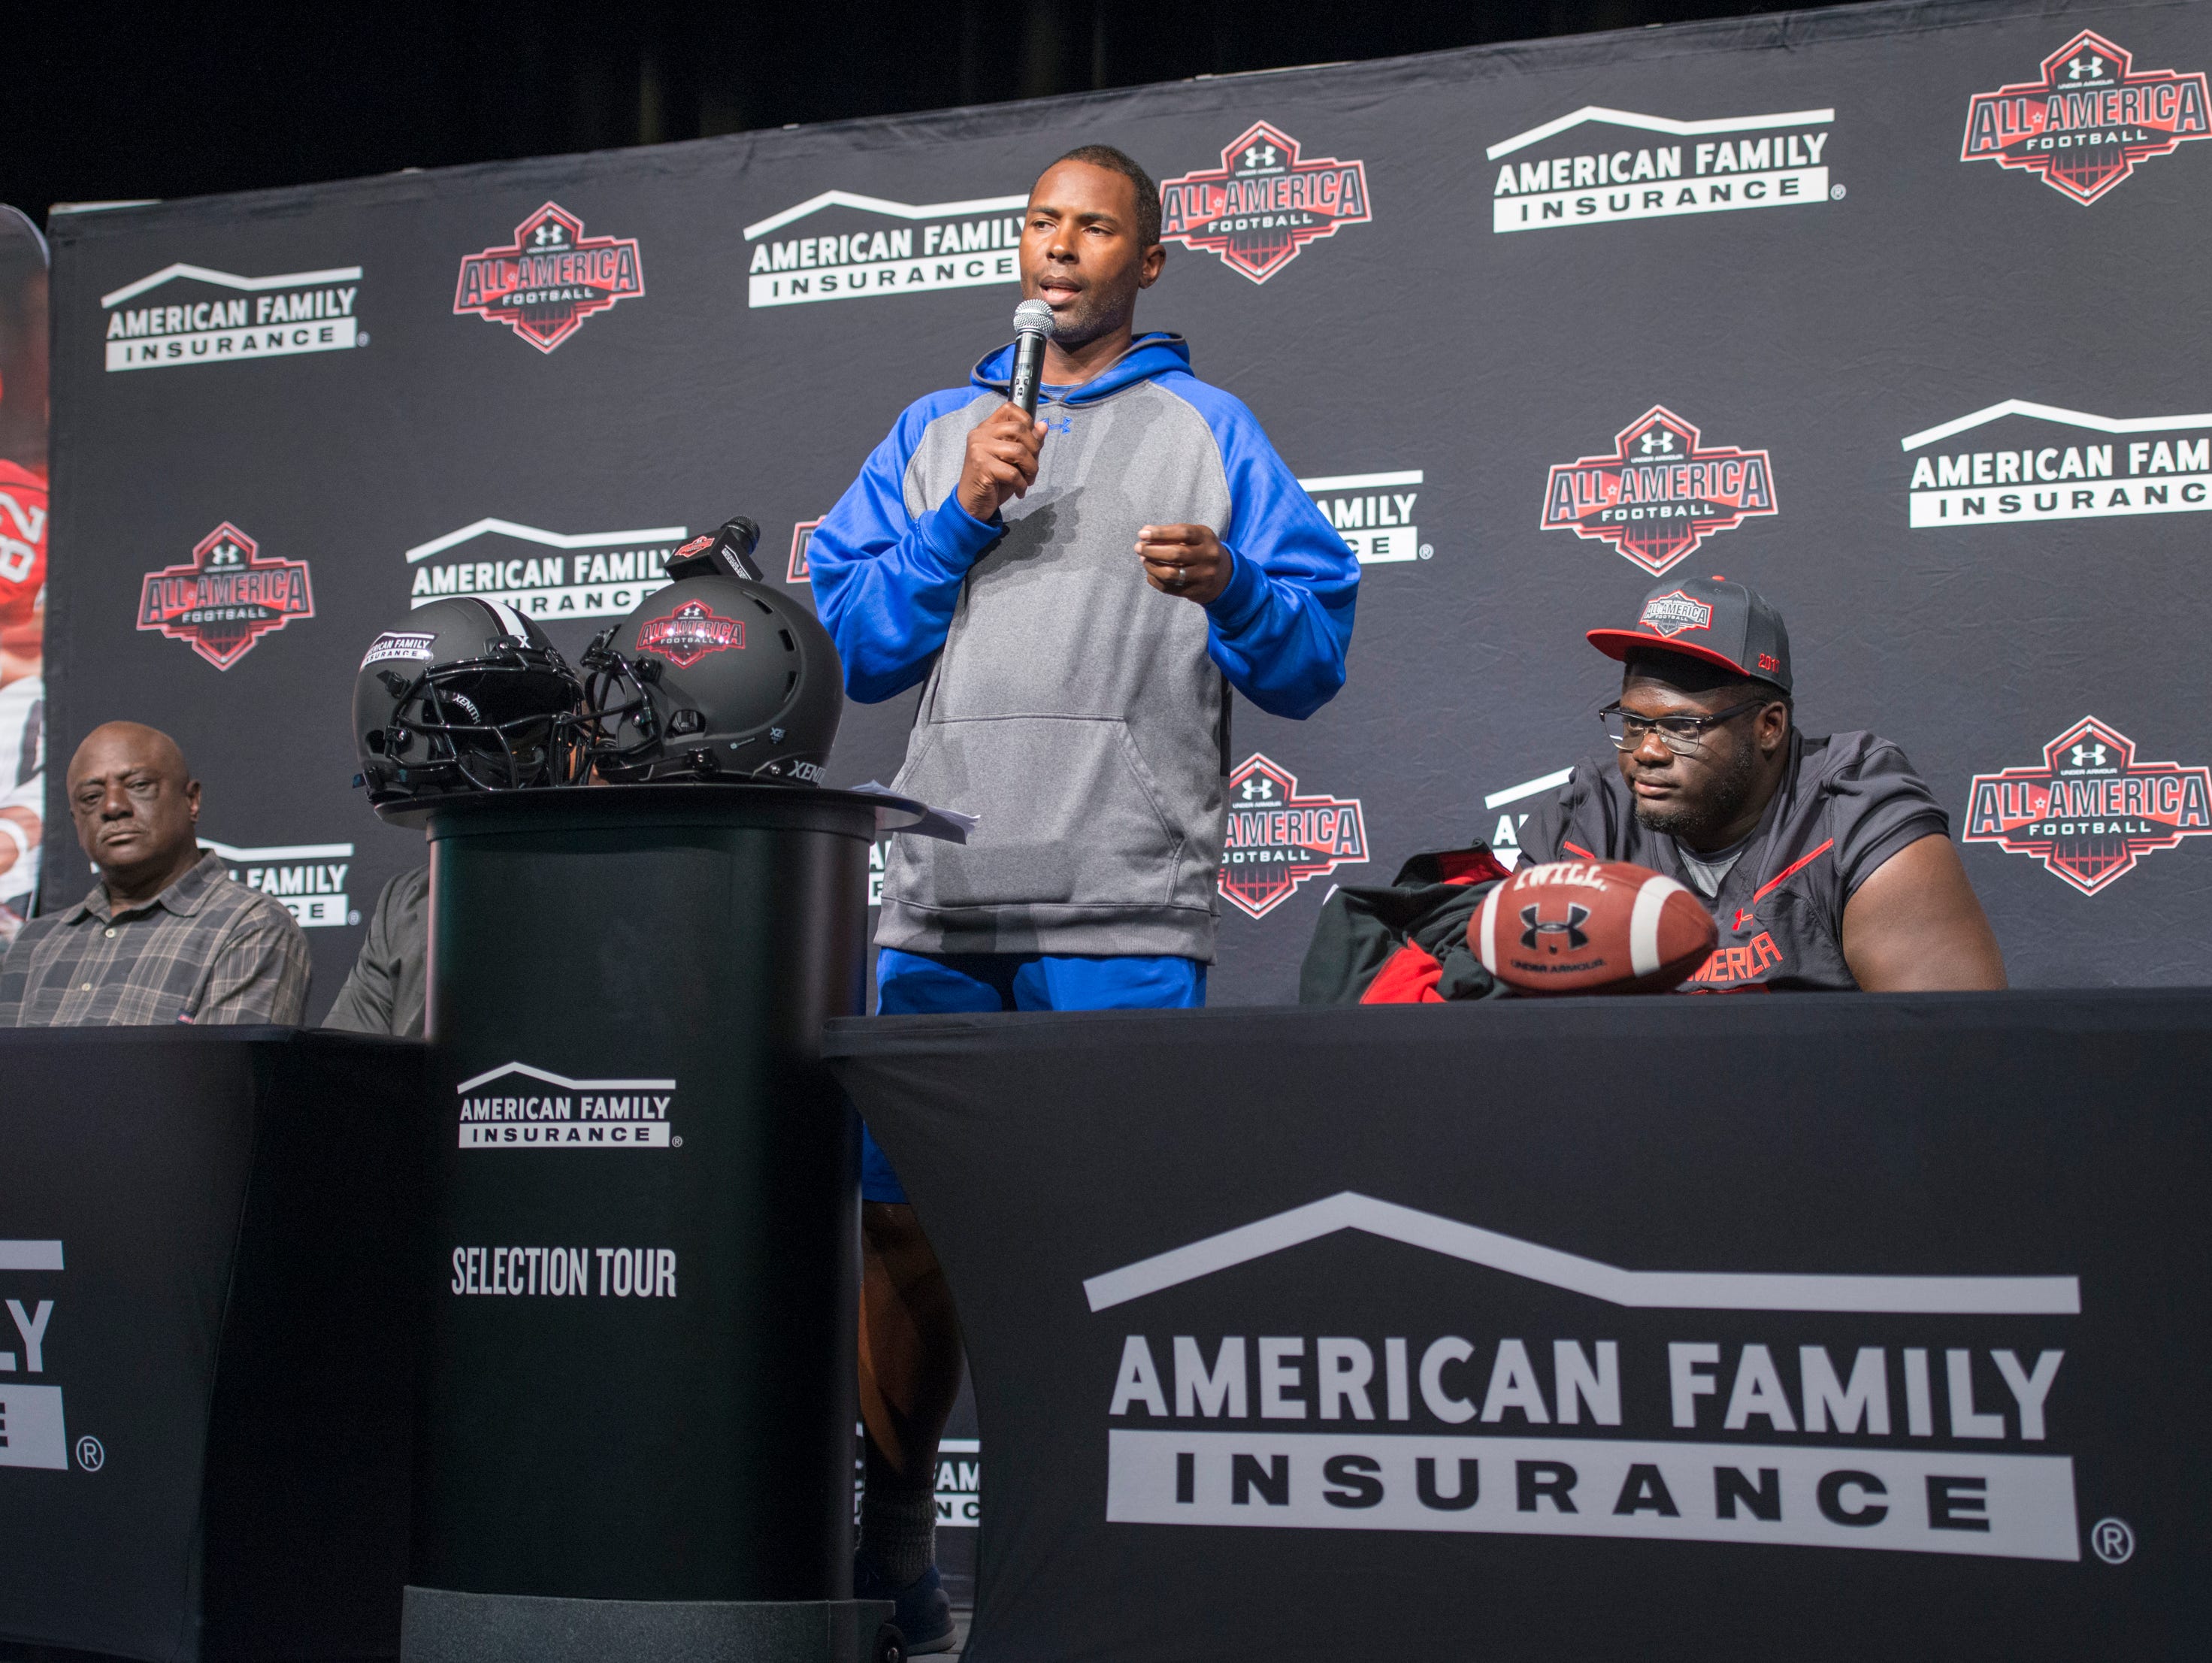 Coach Charlie Ward speaks during the event announcing that football player Alex Leatherwood, right, has been selected for the annual Under Armour High School All-America Game at Booker T. Washington High School in Pensacola on Wednesday, October 12, 2016. The game featuring more than 90 of the nation's best senior high school football players will be played on January 1, 2017.